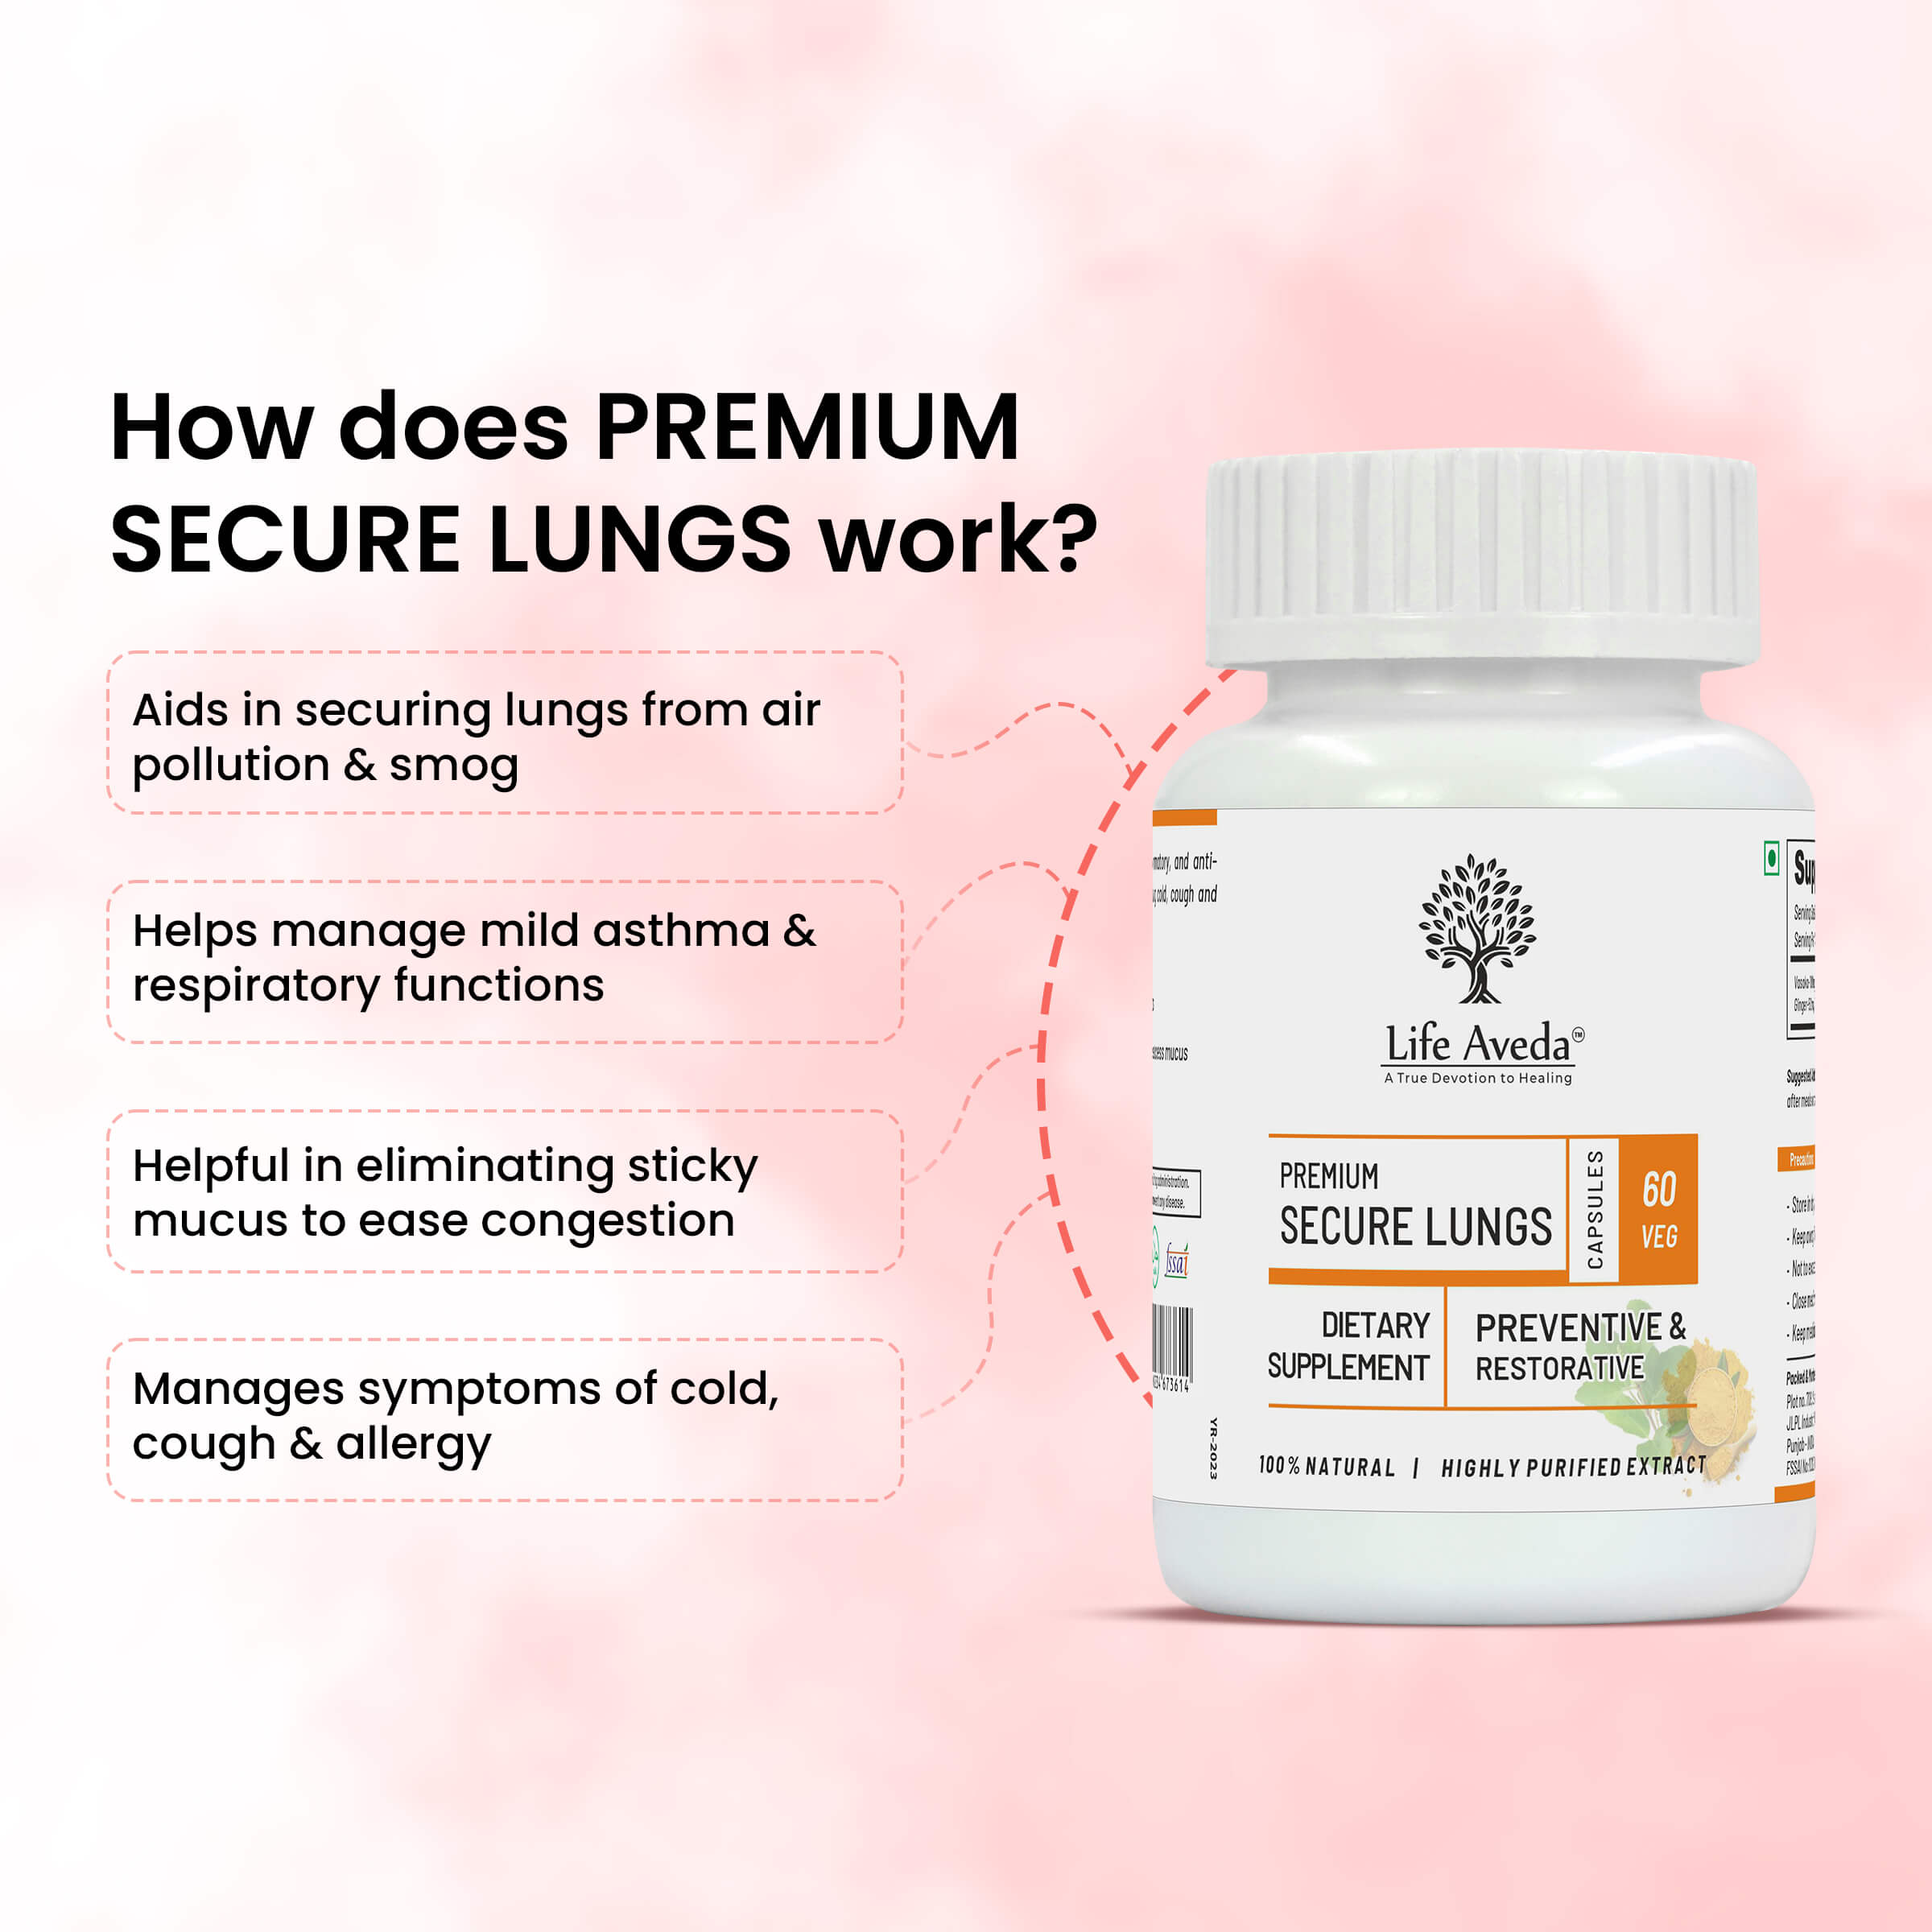 Life Aveda Premium Secure Lungs Benefits